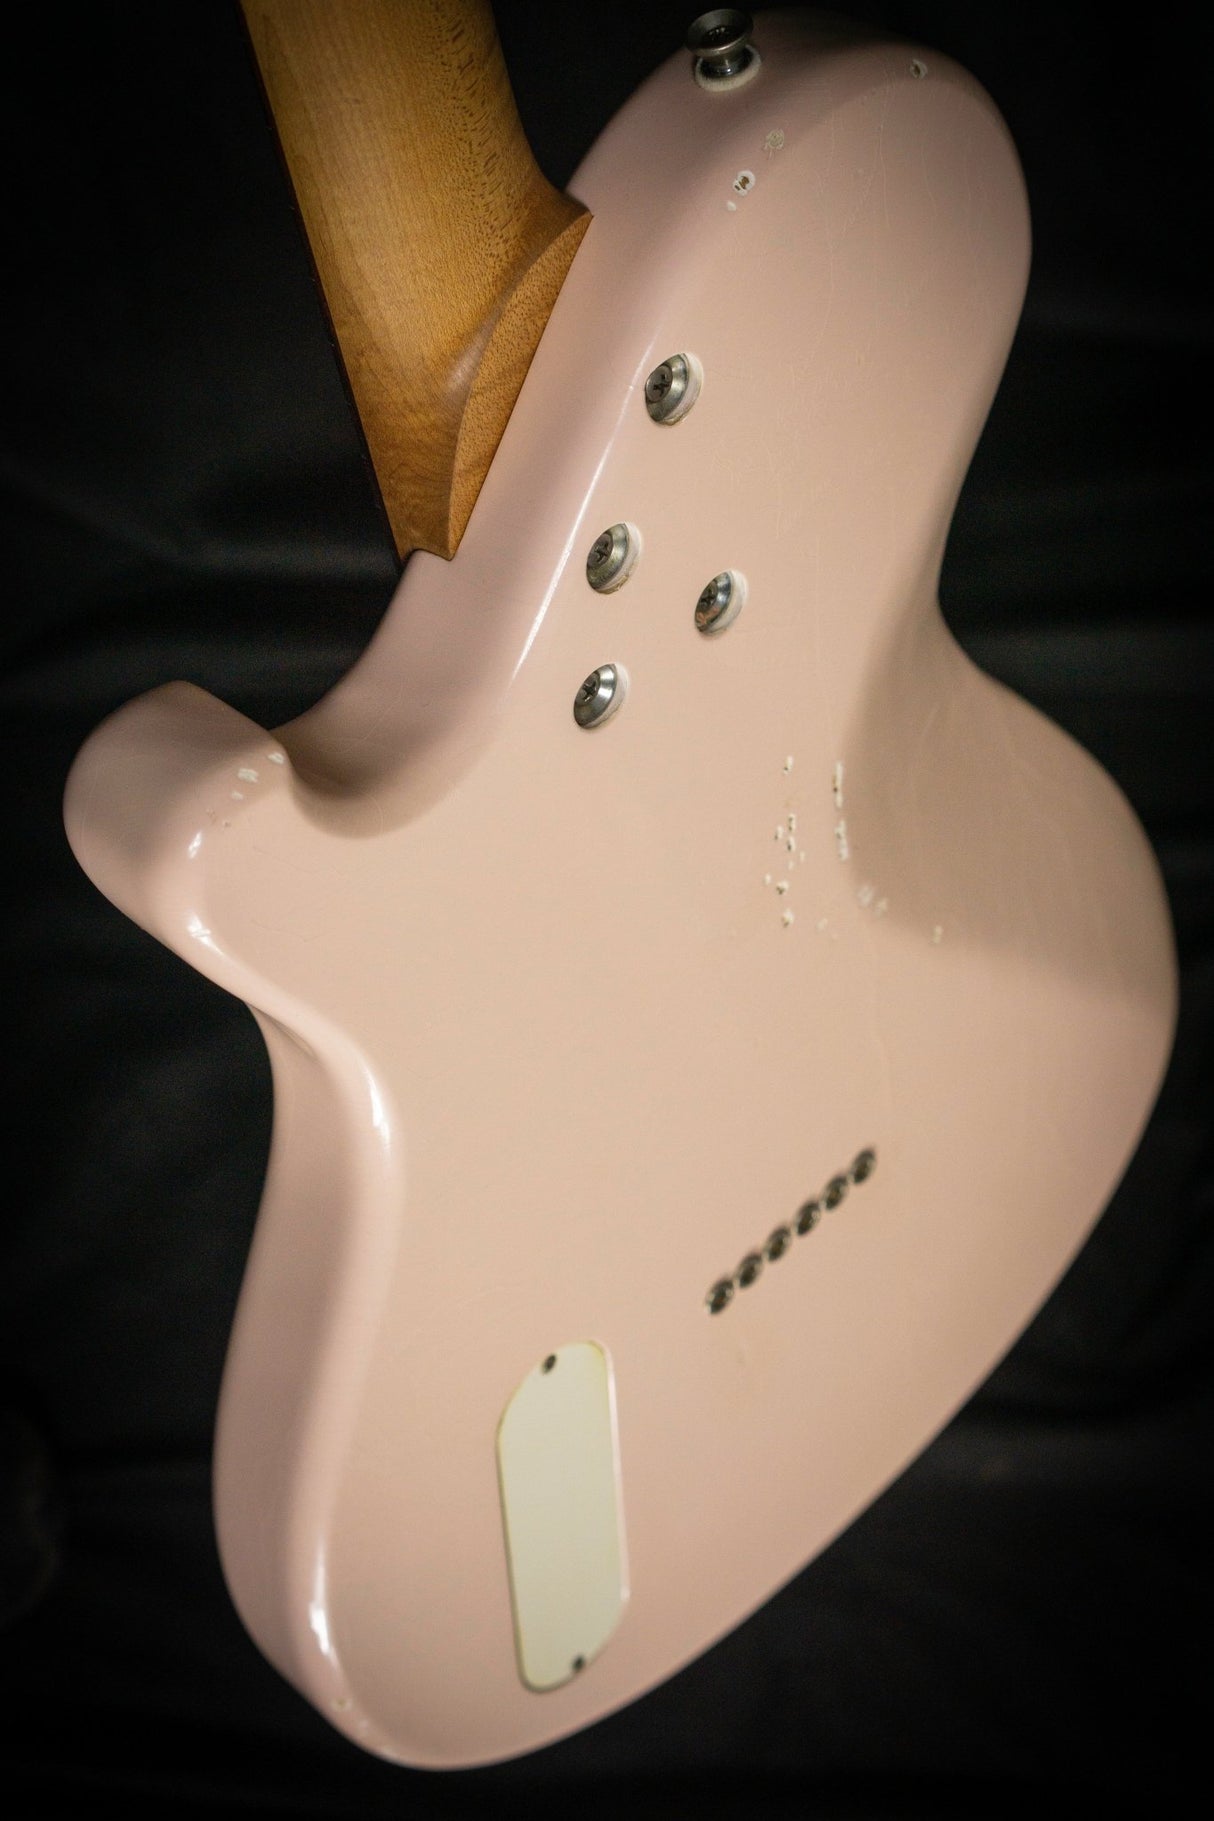 Seth Baccus Shoreline JM H90 Aged Shell Pink (Pre-Owned) - Electric Guitars - Seth Baccus